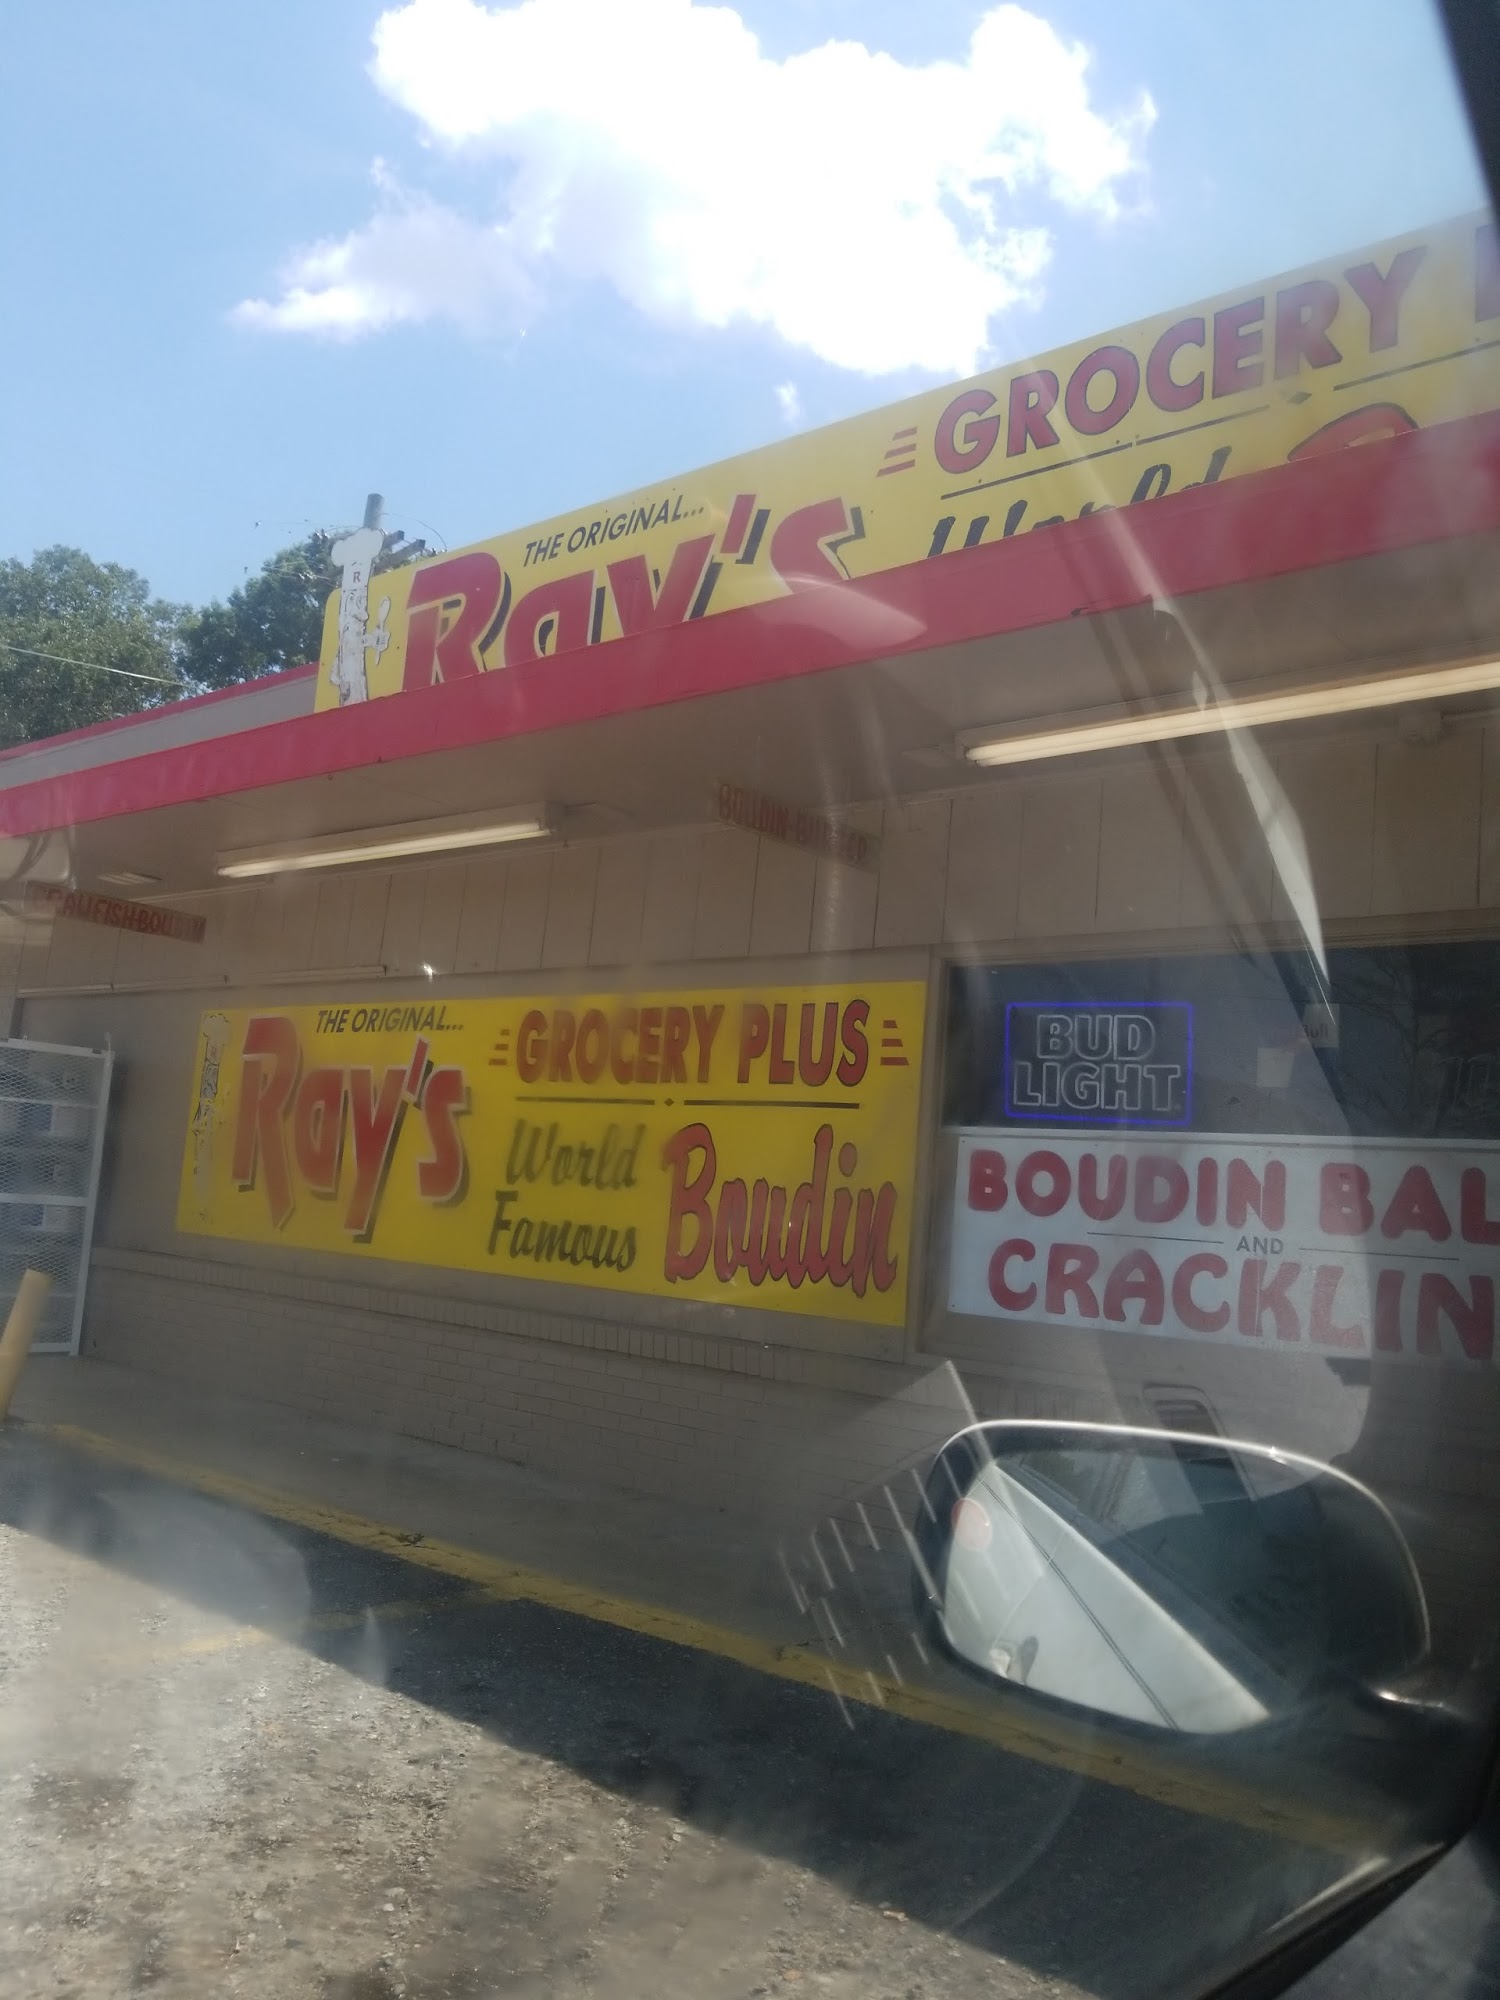 Ray's Grocery Plus